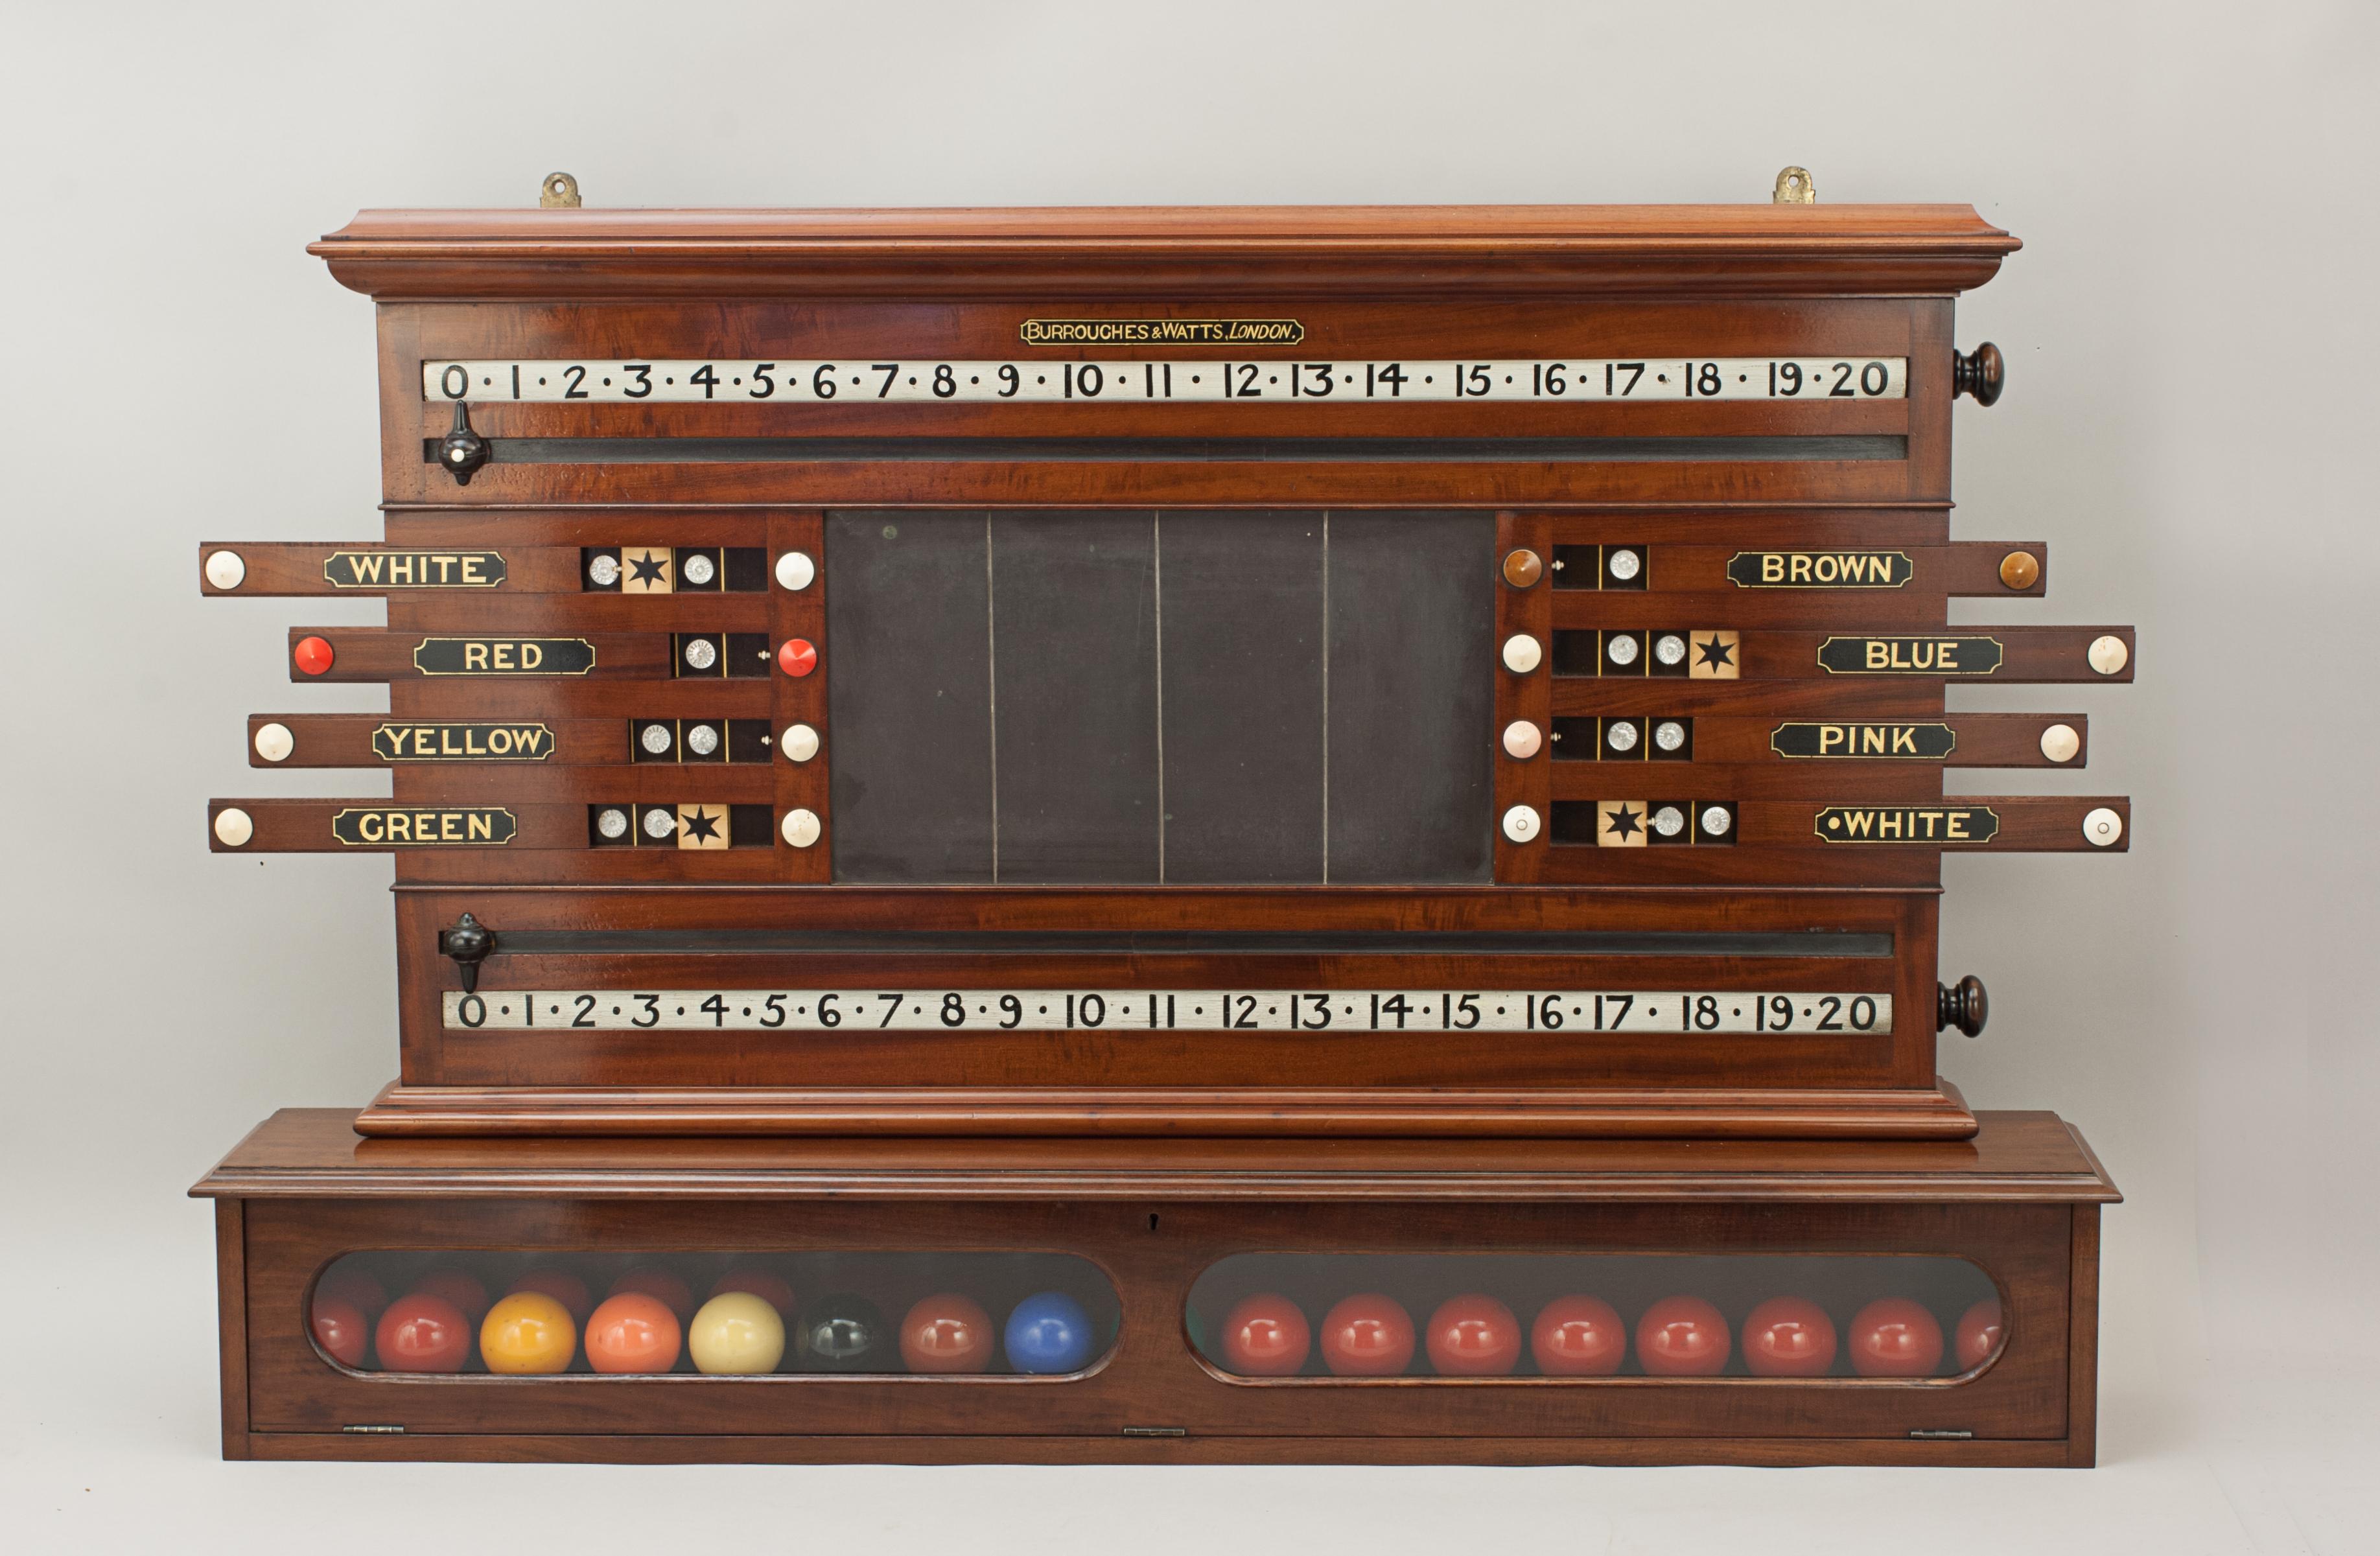 Burroughes & Watts Billiard, snooker score board, life pool, ball cabinet.
A nice combined billiards and life pool scoreboard made of mahogany by Burroughes & Watts. The billiard scorer sits upon a lockable ball cabinet that can house 34 balls. The